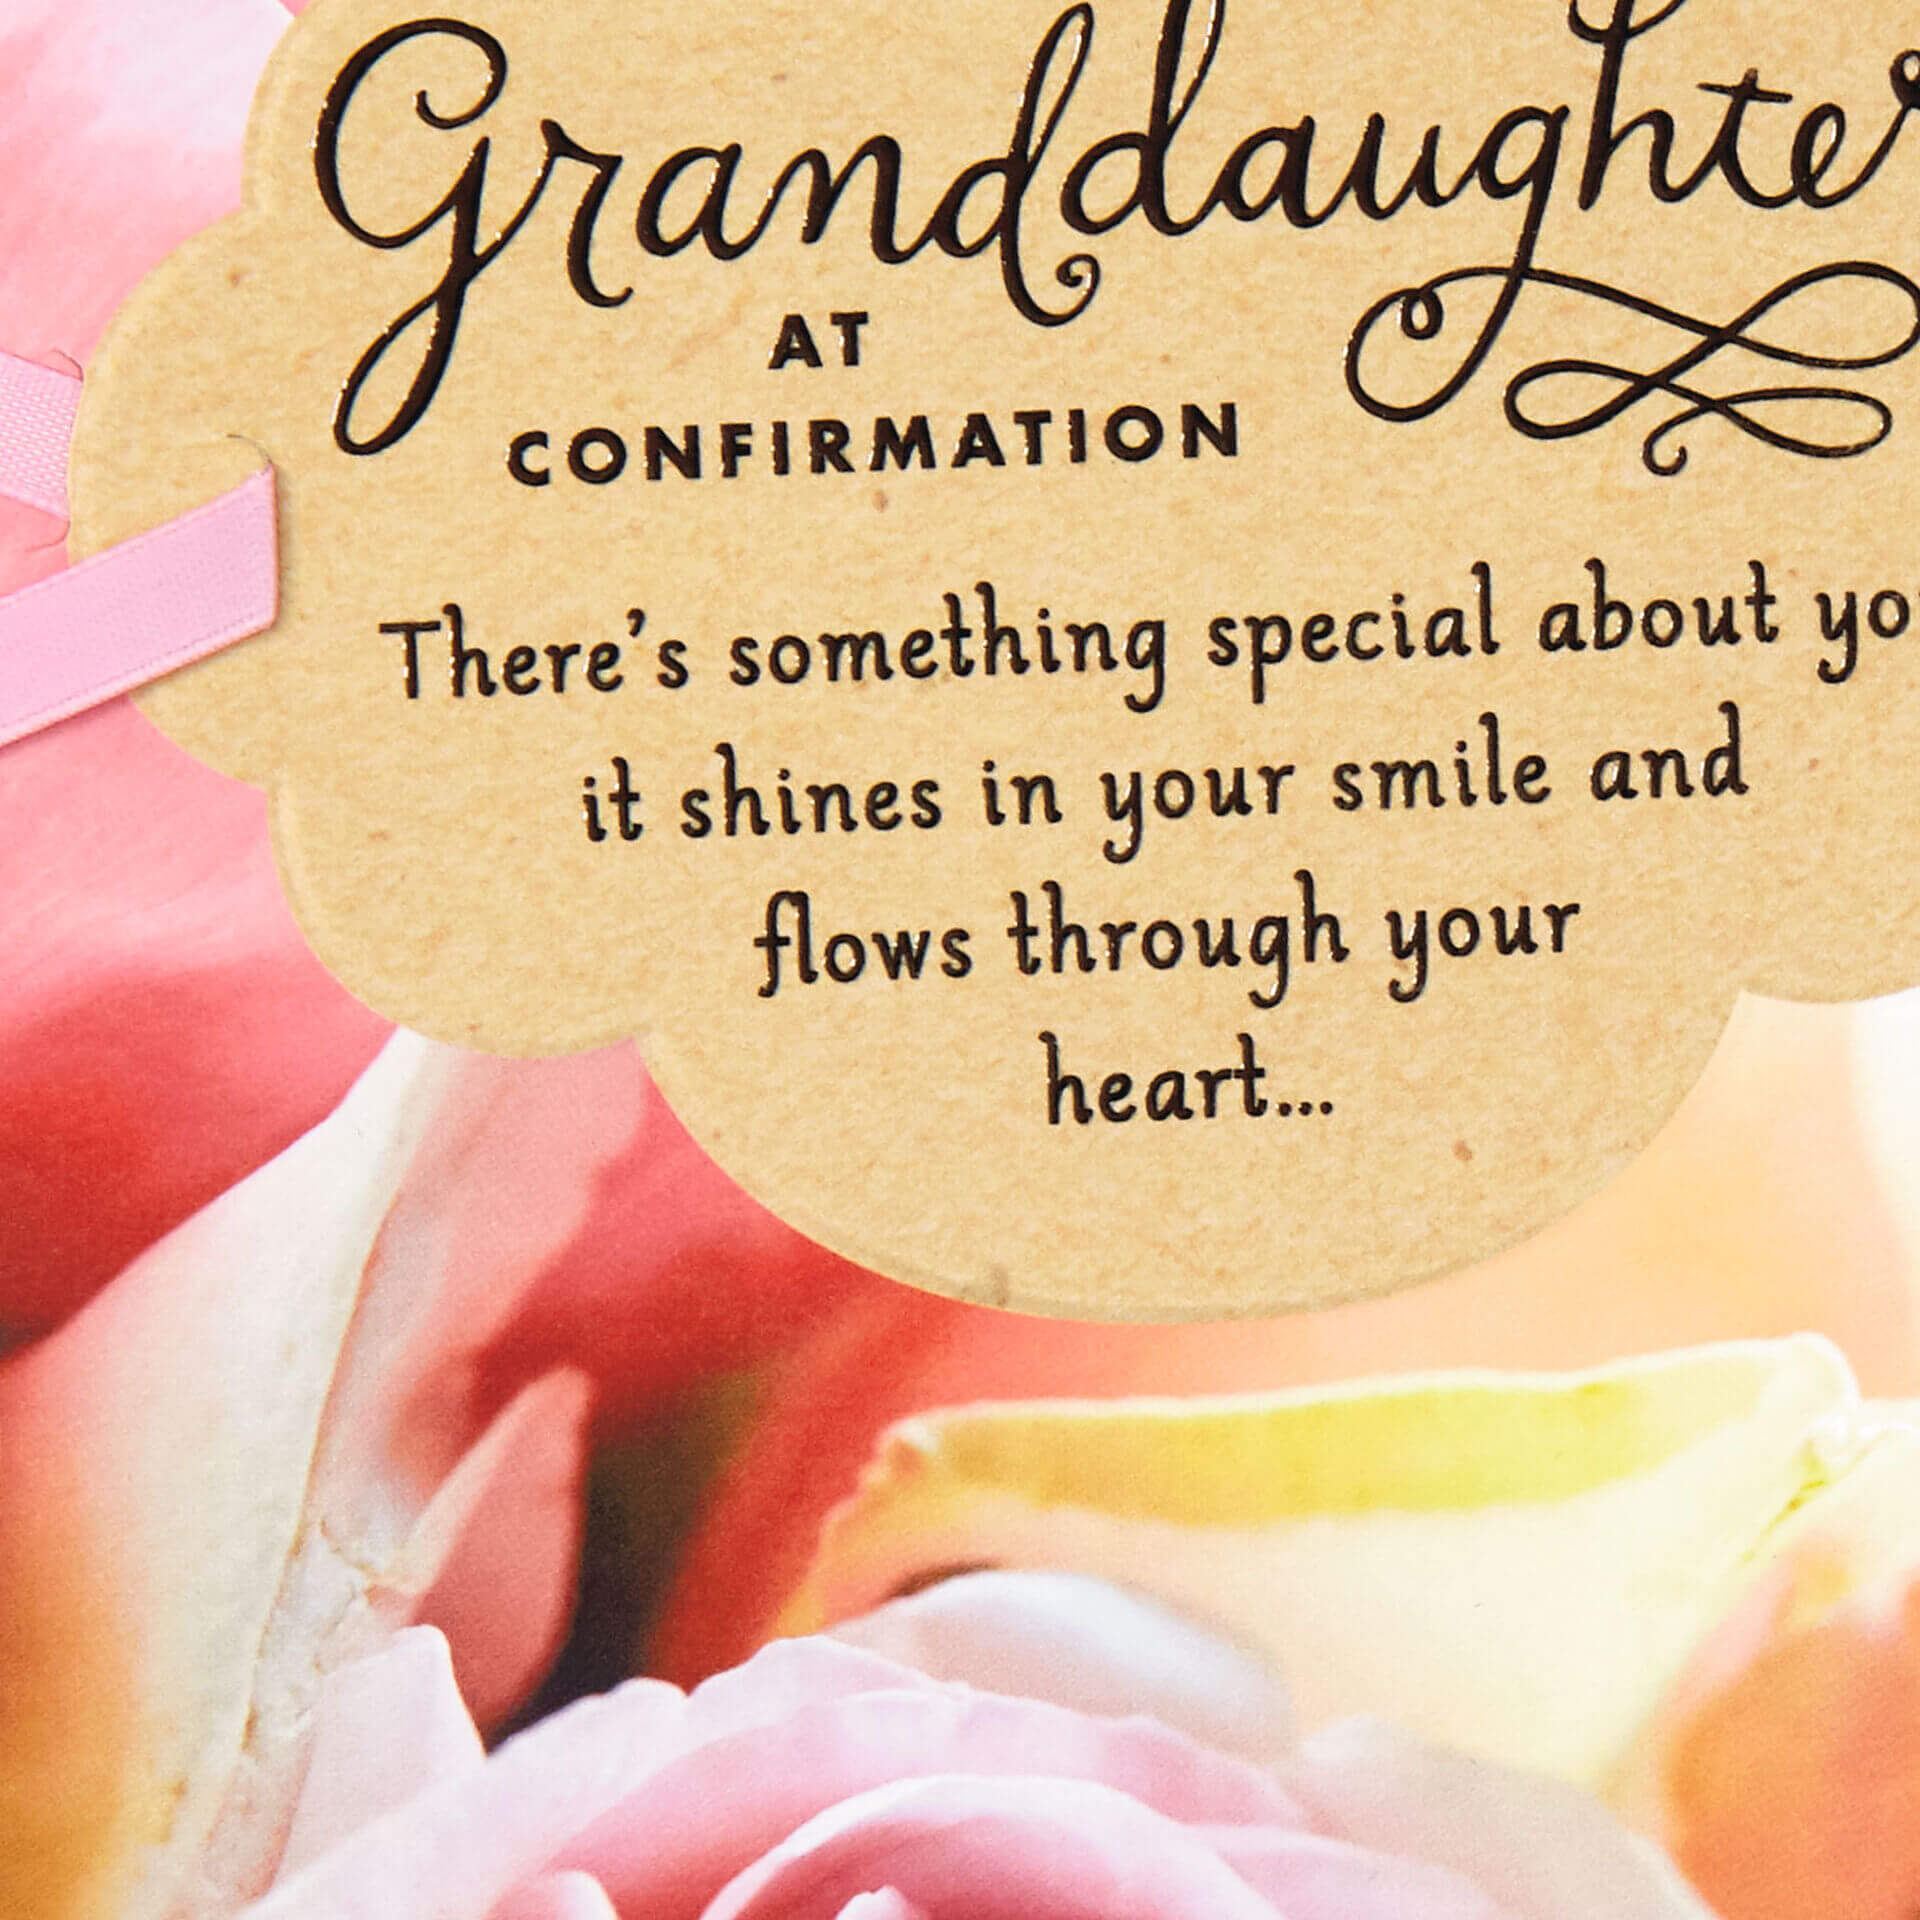 7 Confirmation Wishes For Granddaughter 90 LoveHome